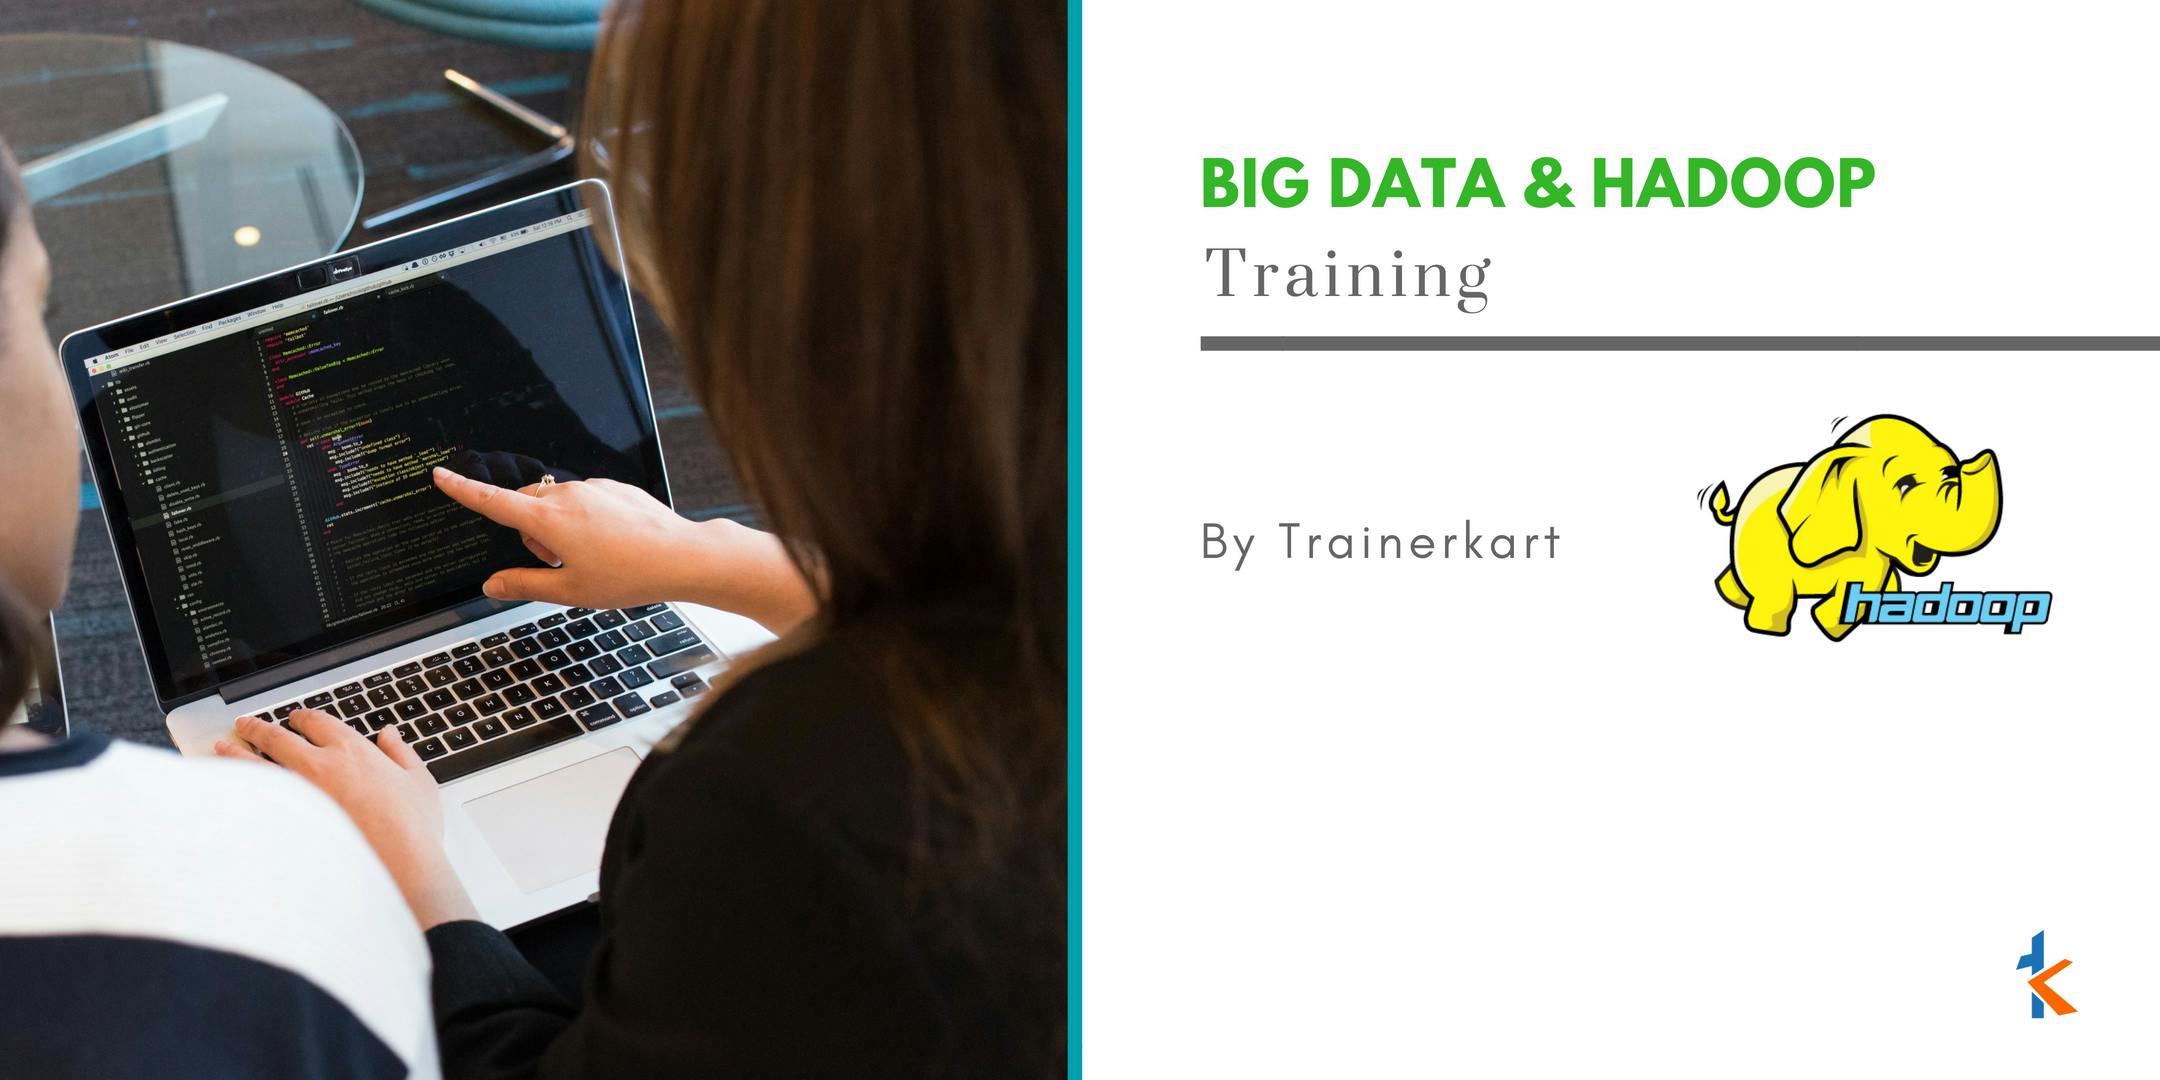 Big Data and Hadoop Classroom Training in Melbourne, FL